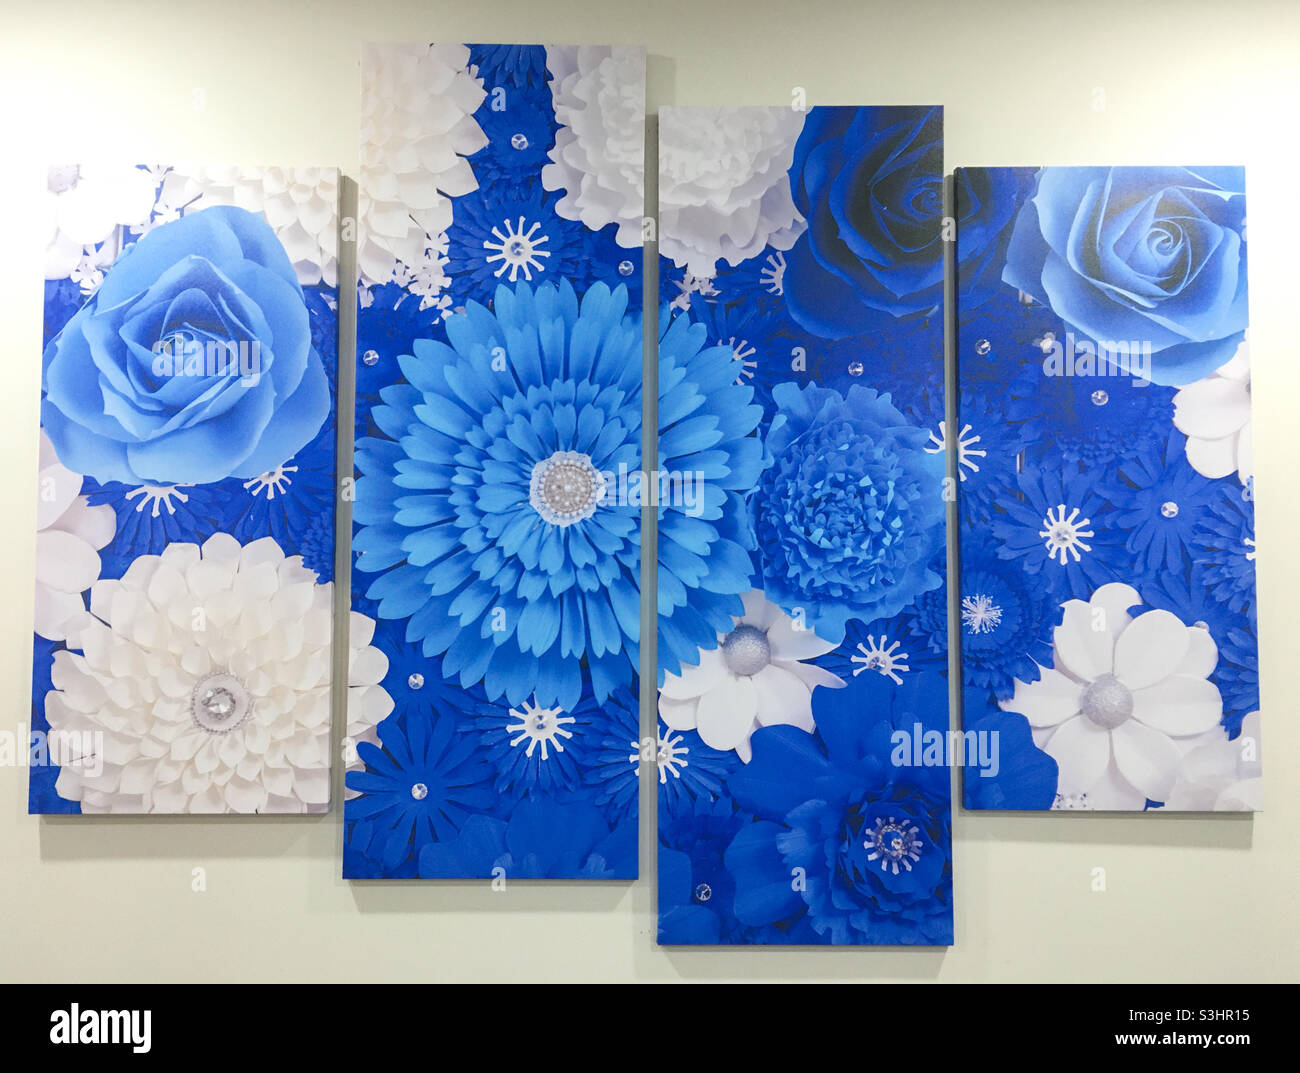 Blue and white flowers wall decorations. Stock Photo